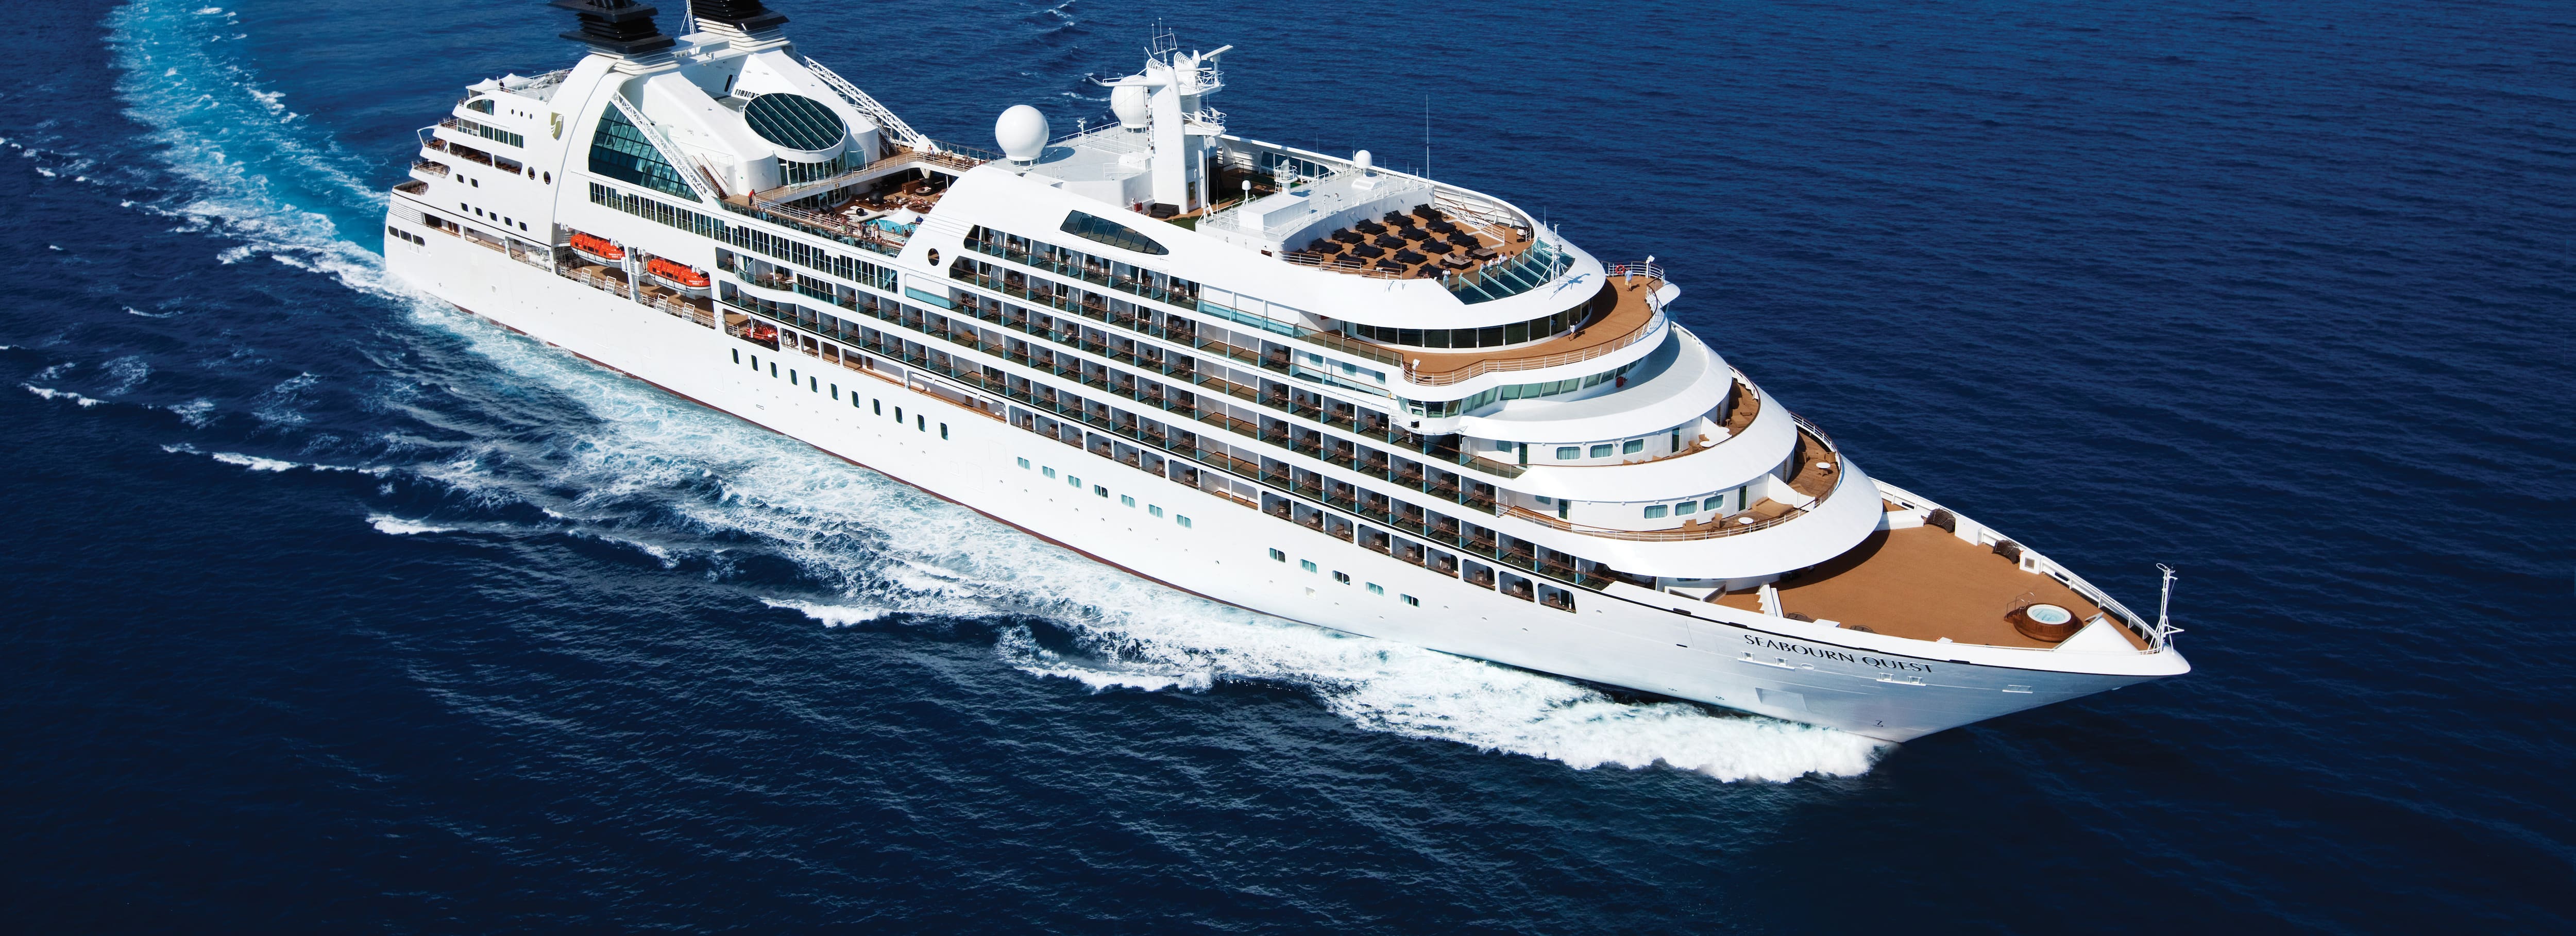 seabourn cruises manage my booking